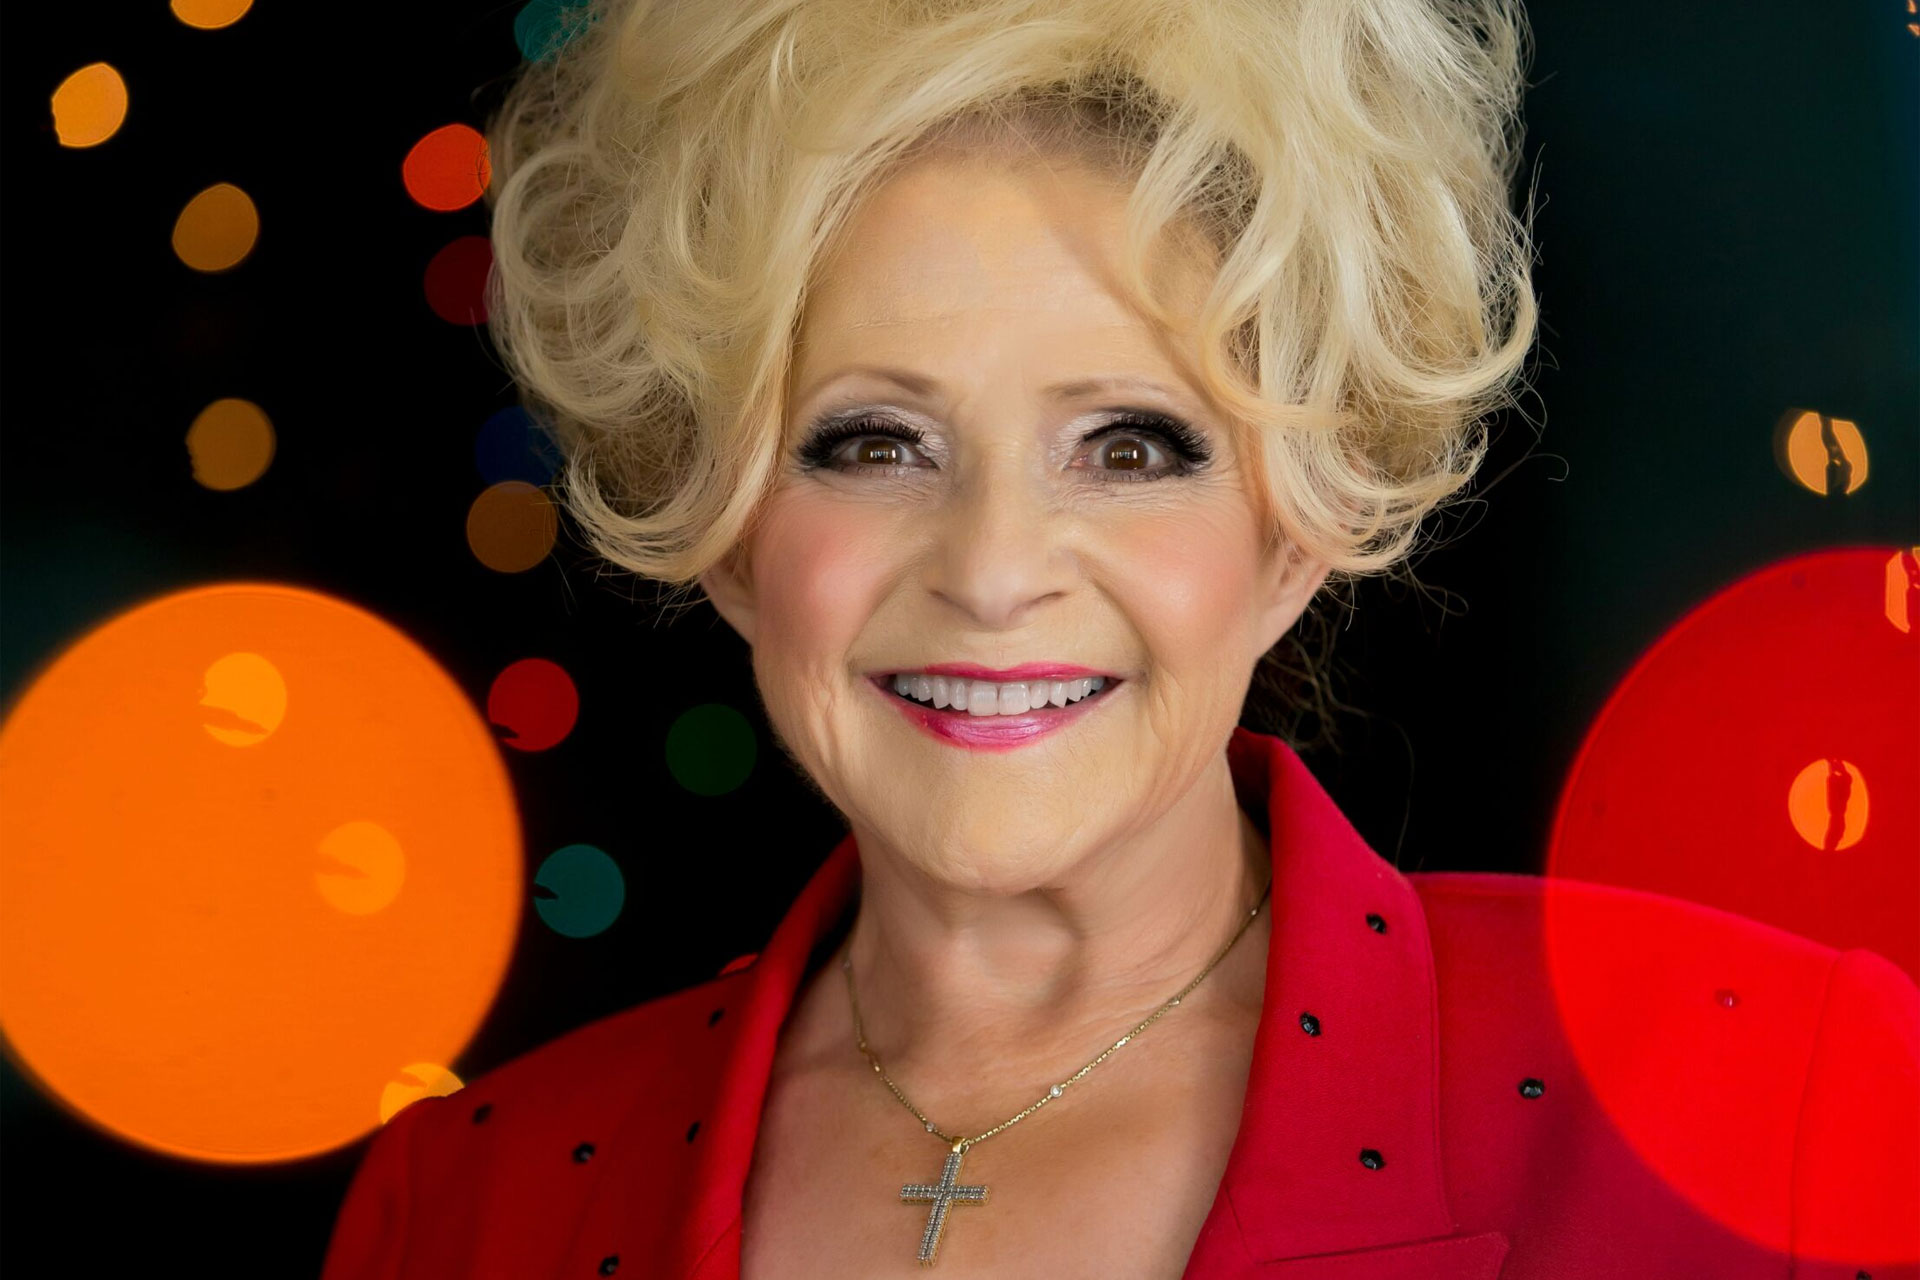 Brenda Lee’s ‘Rockin’ Around The Christmas Tree’ Soars To The Top Of The Hot 100 Chart